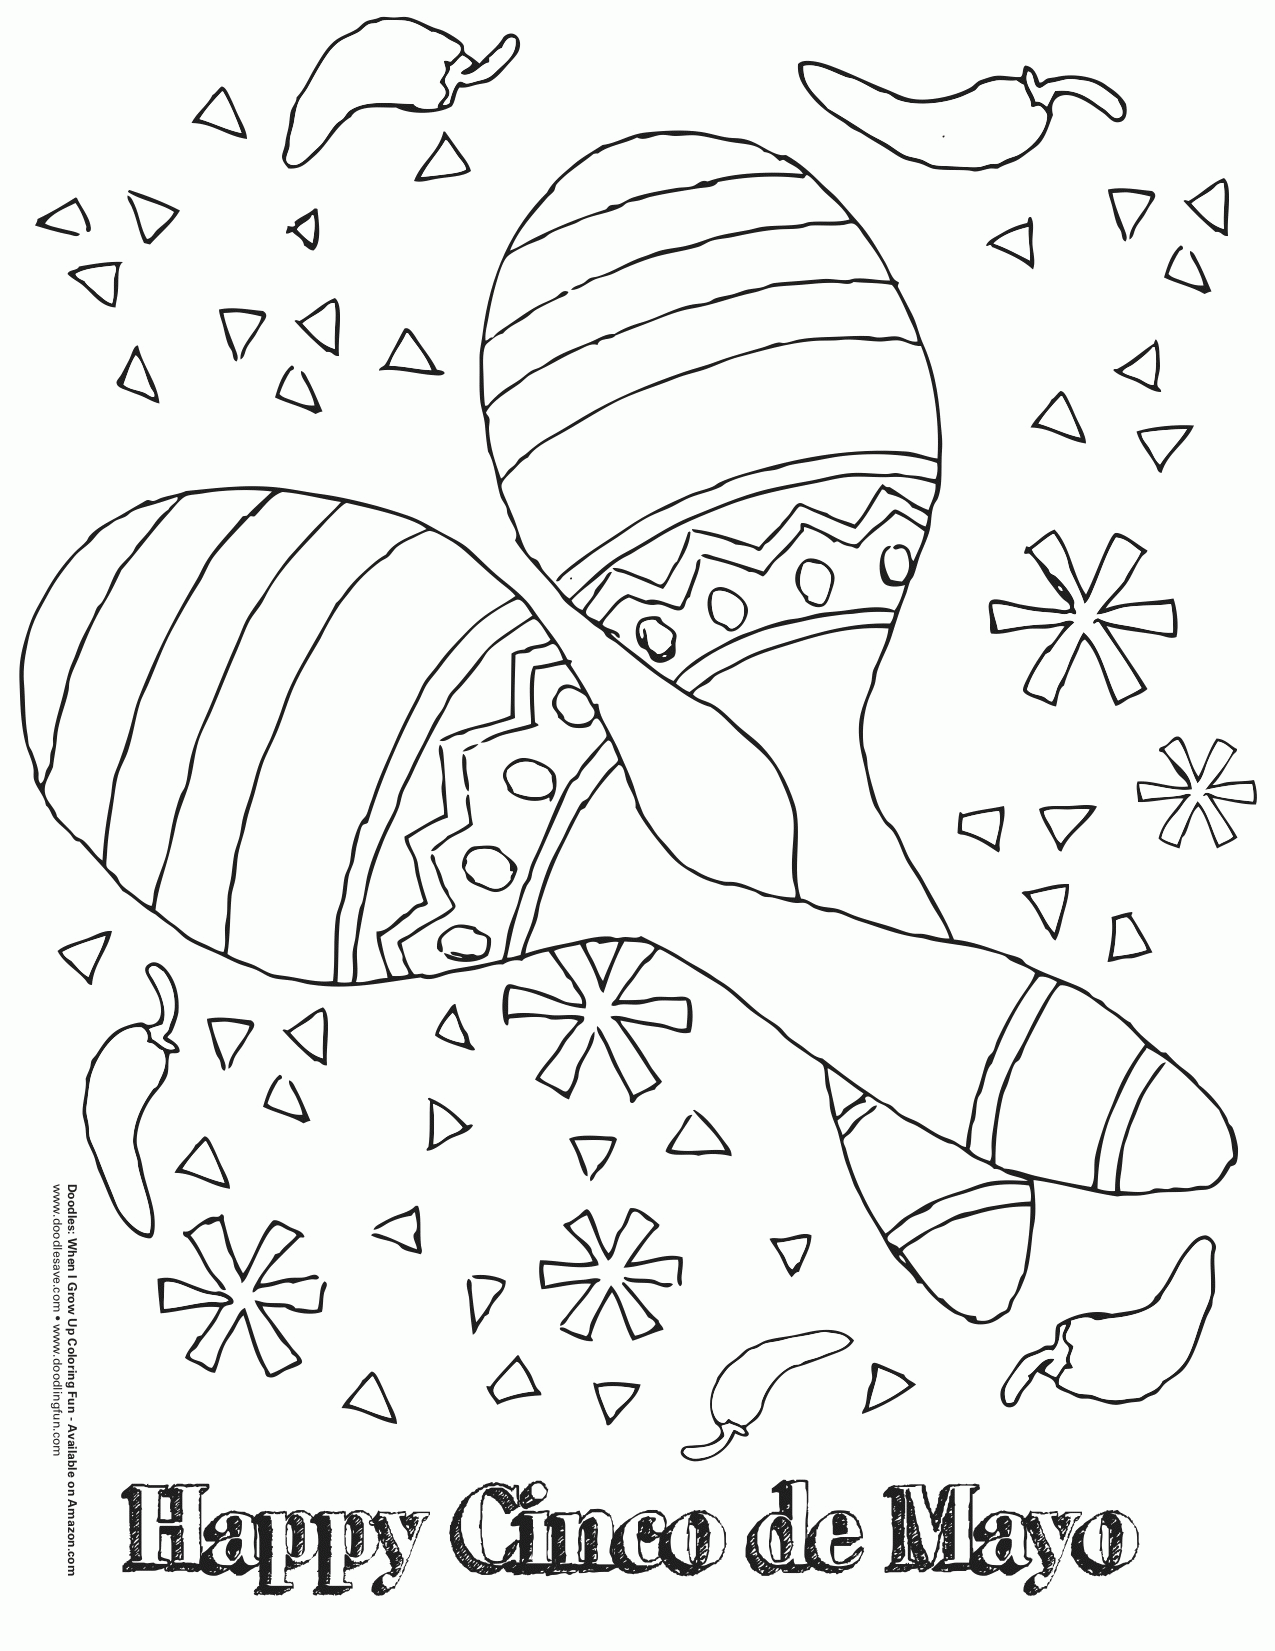 happy cinco de mayo coloring - Free Large Images